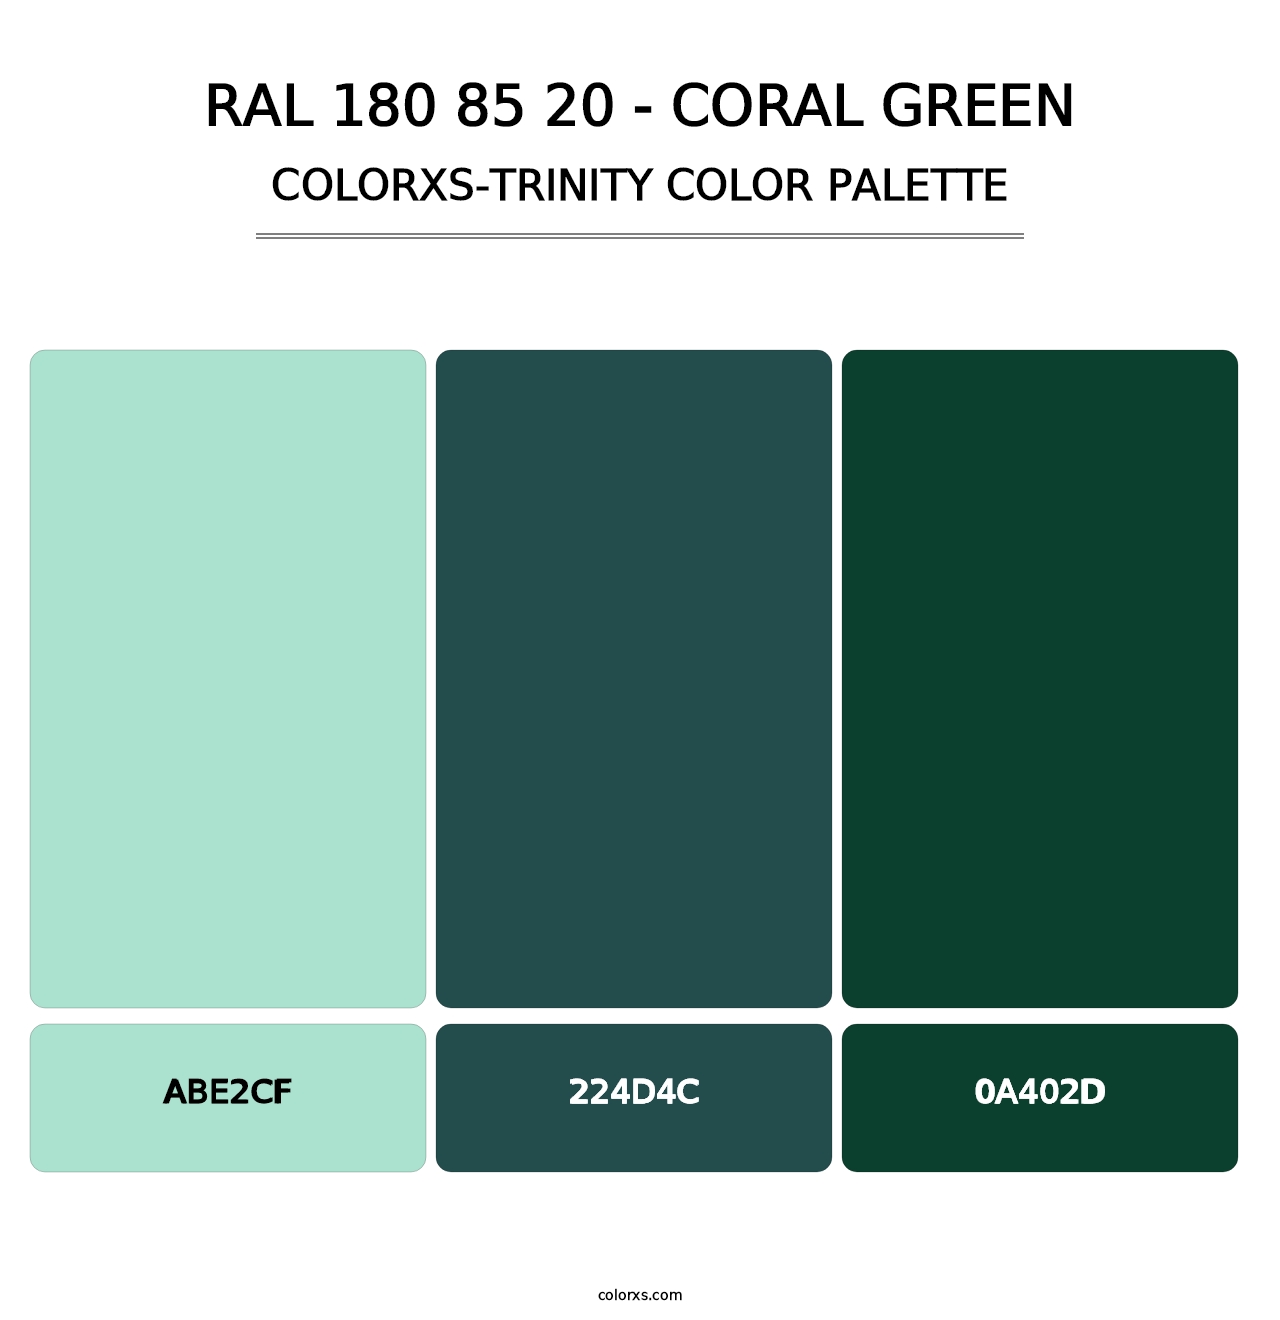 RAL 180 85 20 - Coral Green - Colorxs Trinity Palette